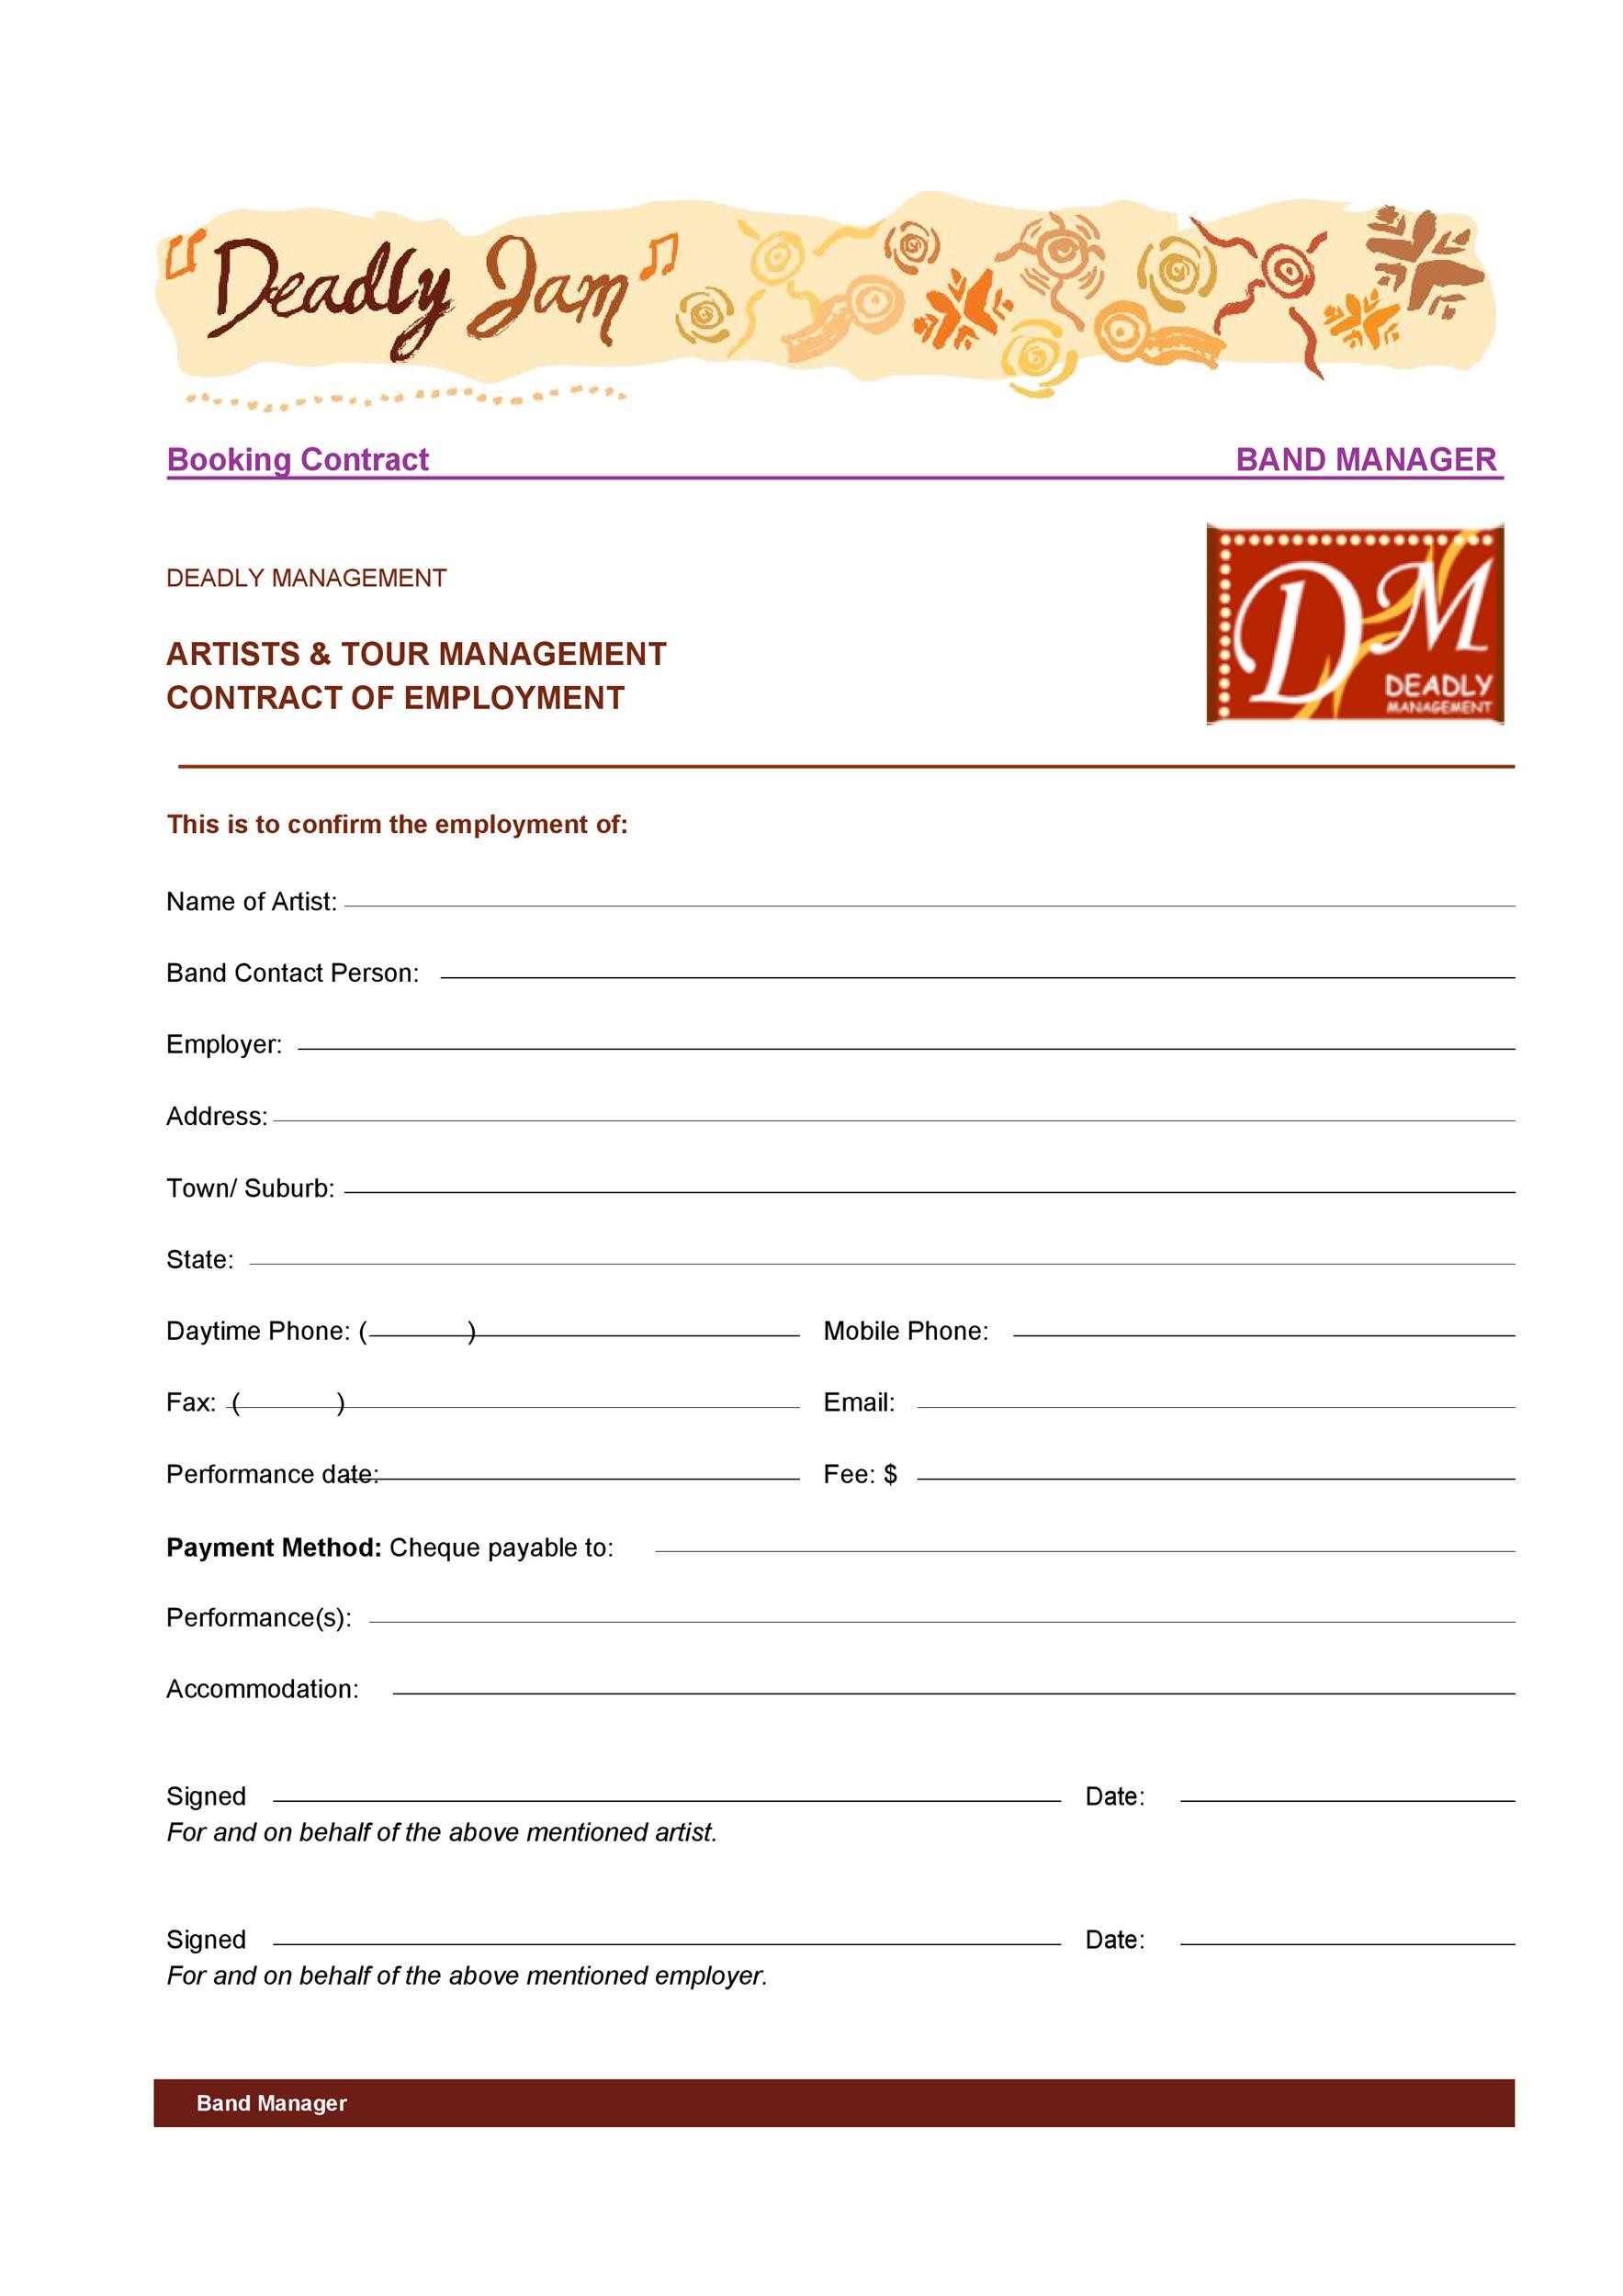 Free artist management contract 09